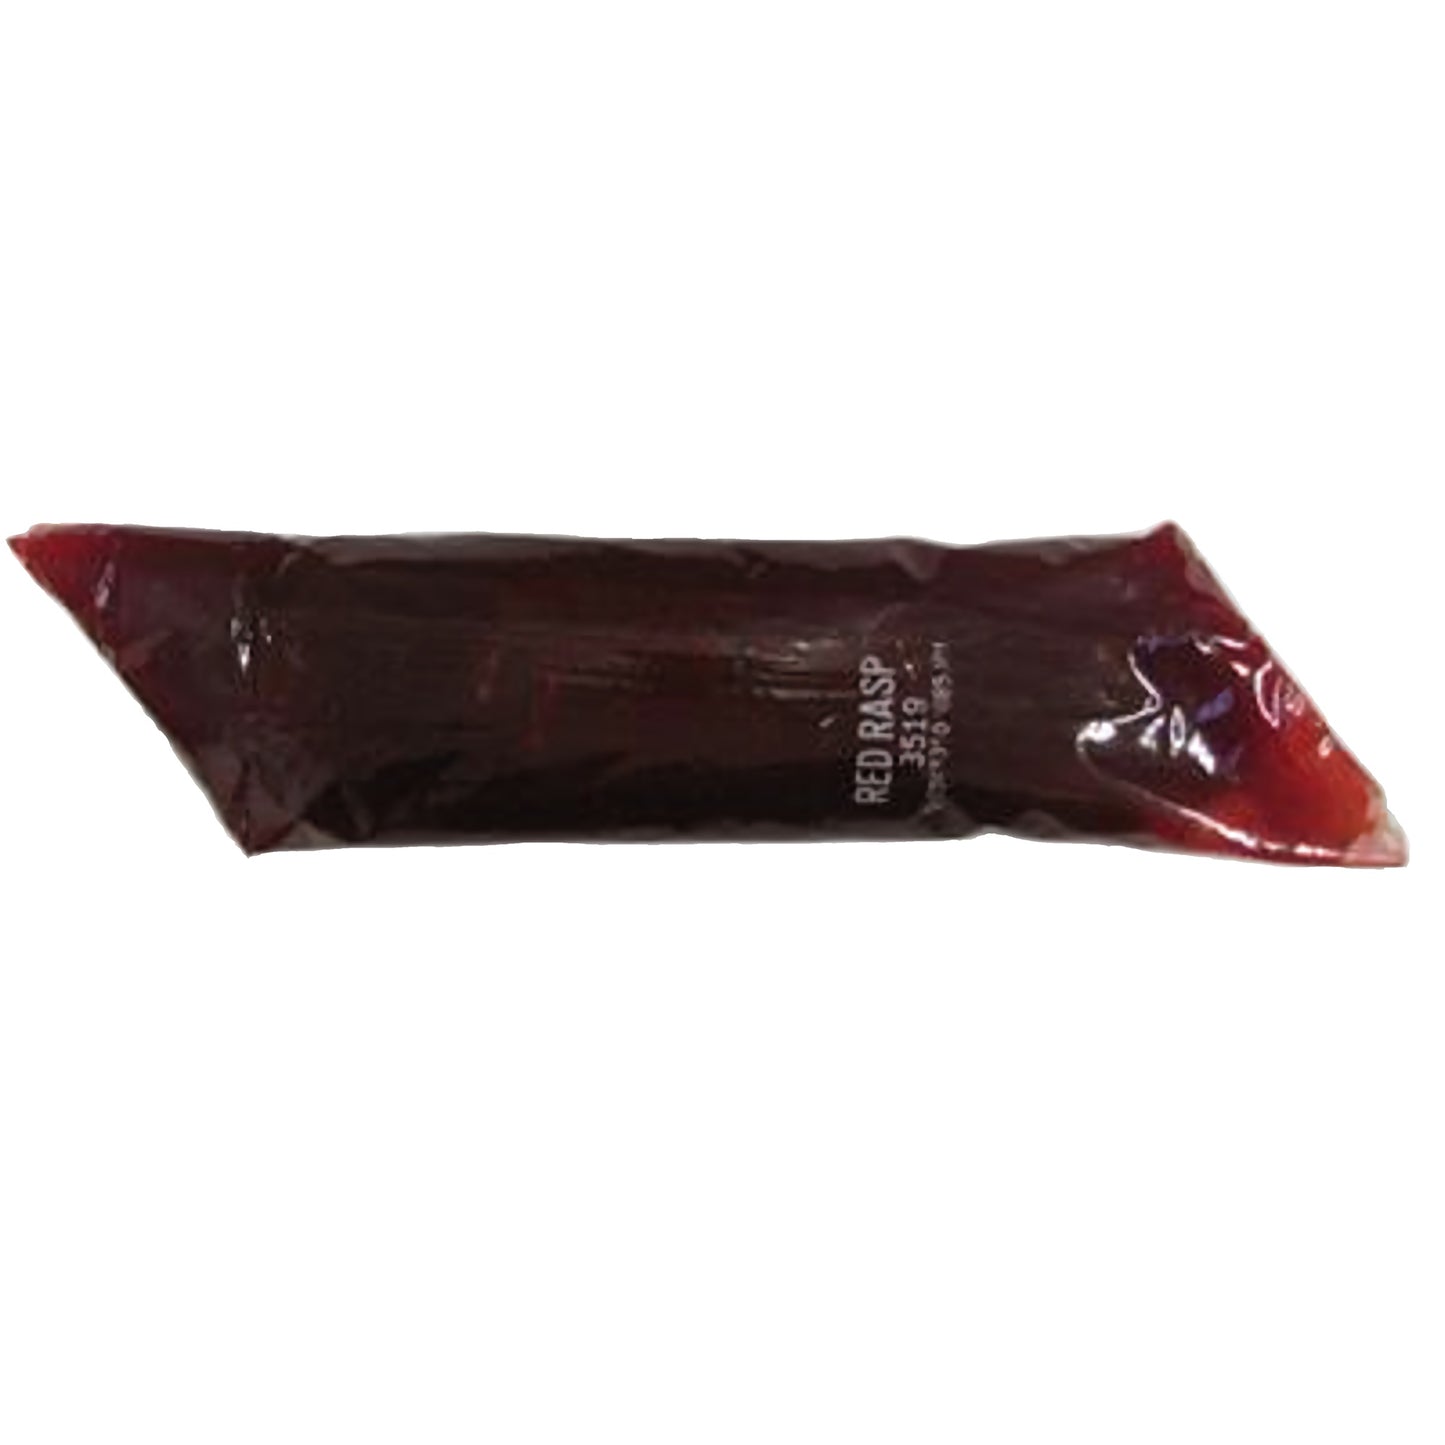 Premium raspberry cake and pastry filling, packed in a professional-use bag, featuring a rich and tart raspberry puree blend, perfect for layering within cakes or swirling into pastries.